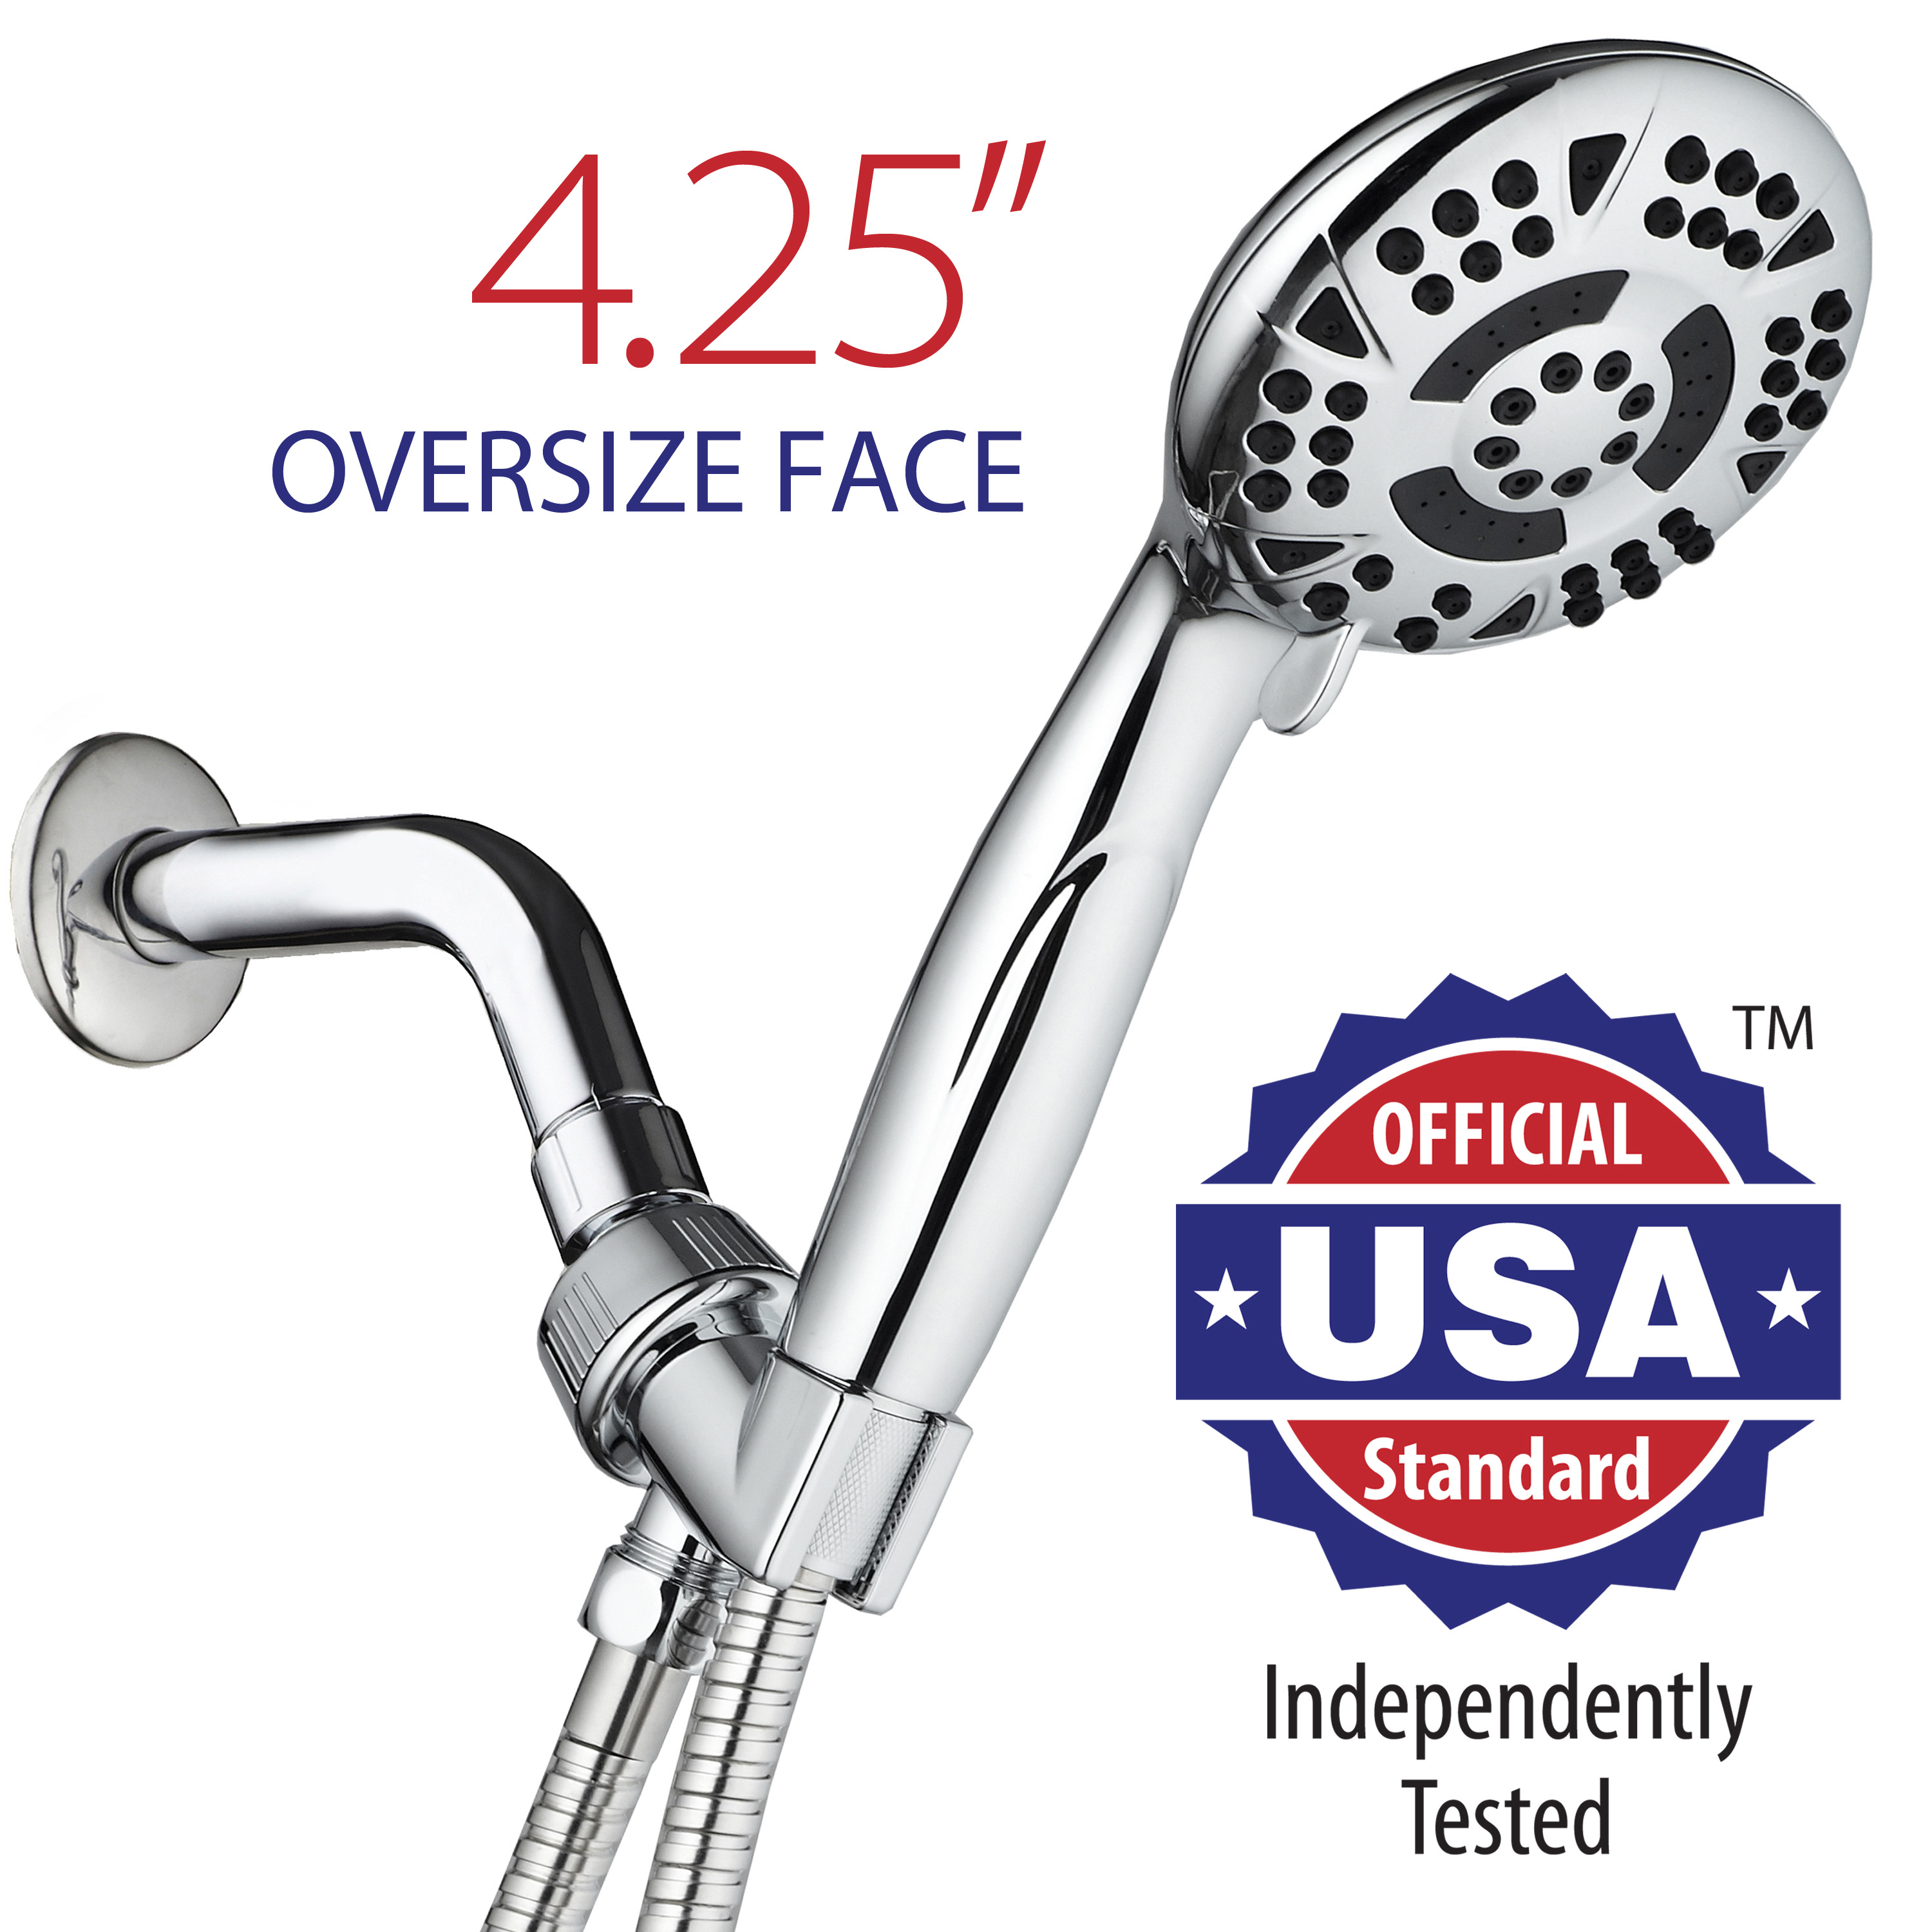 AquaDance High Pressure 6 Setting 4.15 inch Chrome Face Hand Held Shower Head with Hose - image 2 of 7